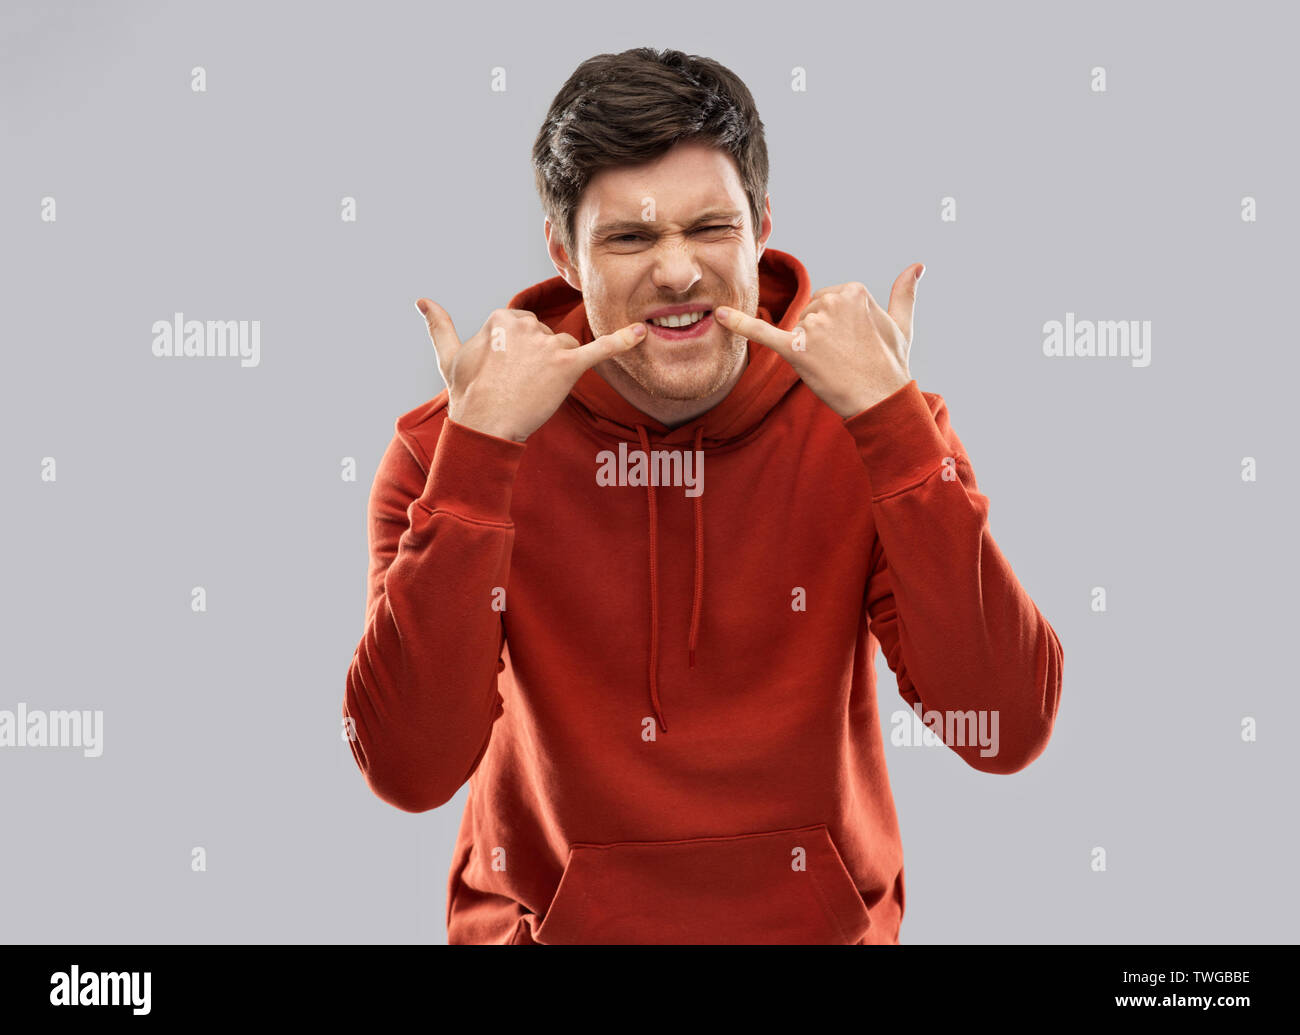 bully young man whistling over grey background Stock Photo